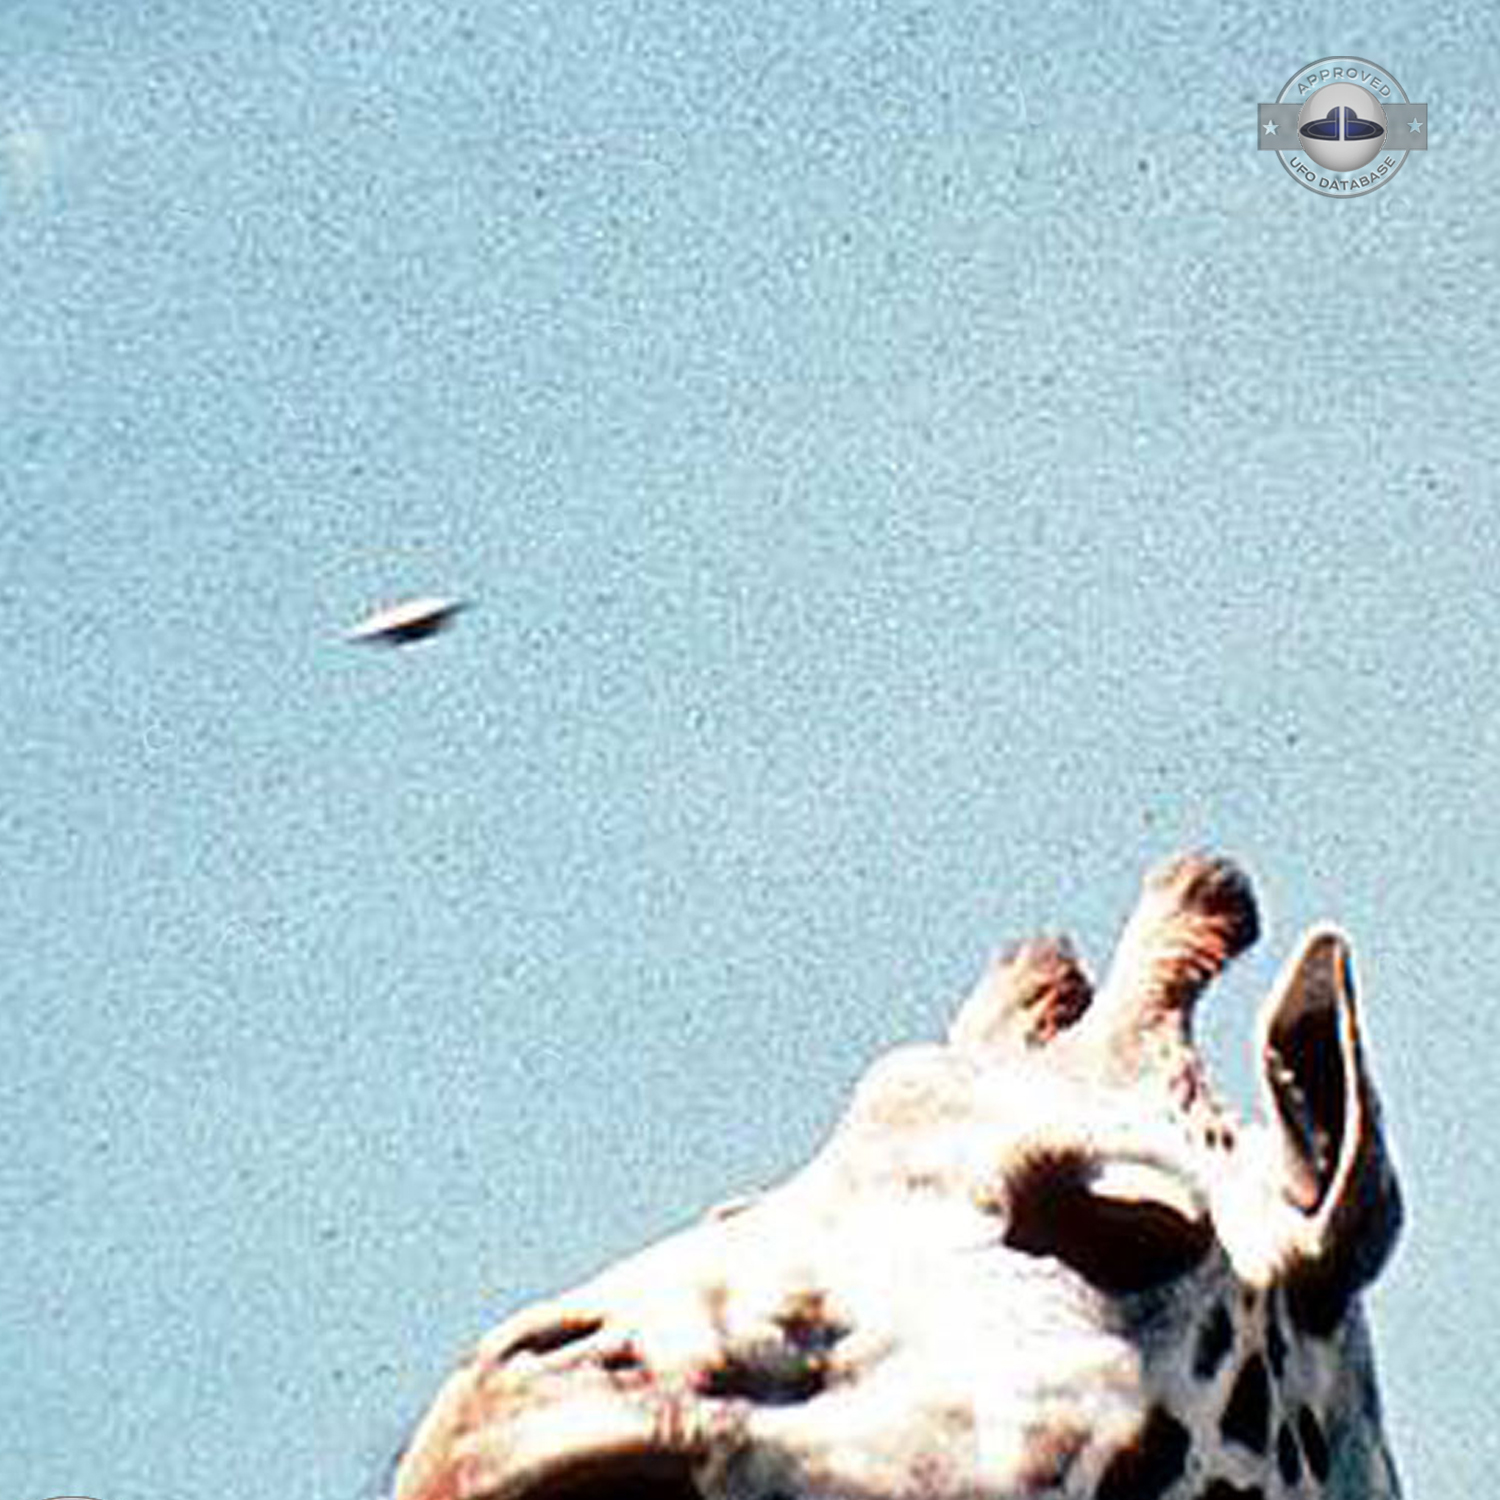 UFO picture shot in Plymouth Zoo which was located in Central Park UFO Picture #132-4